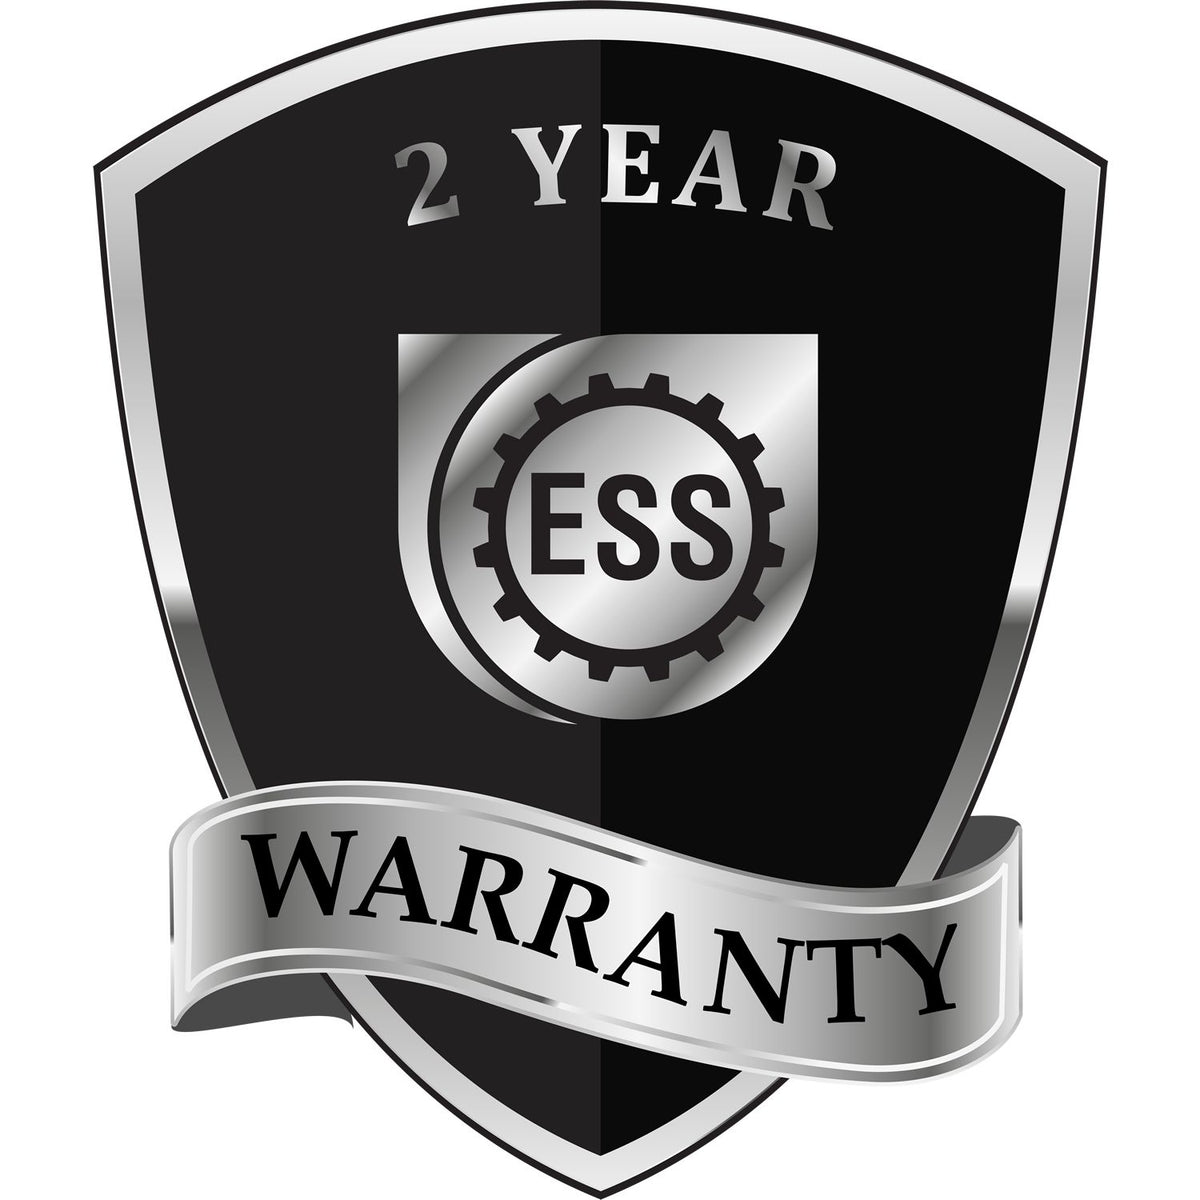 A black and silver badge or emblem showing warranty information for the Soft Texas Professional Geologist Seal